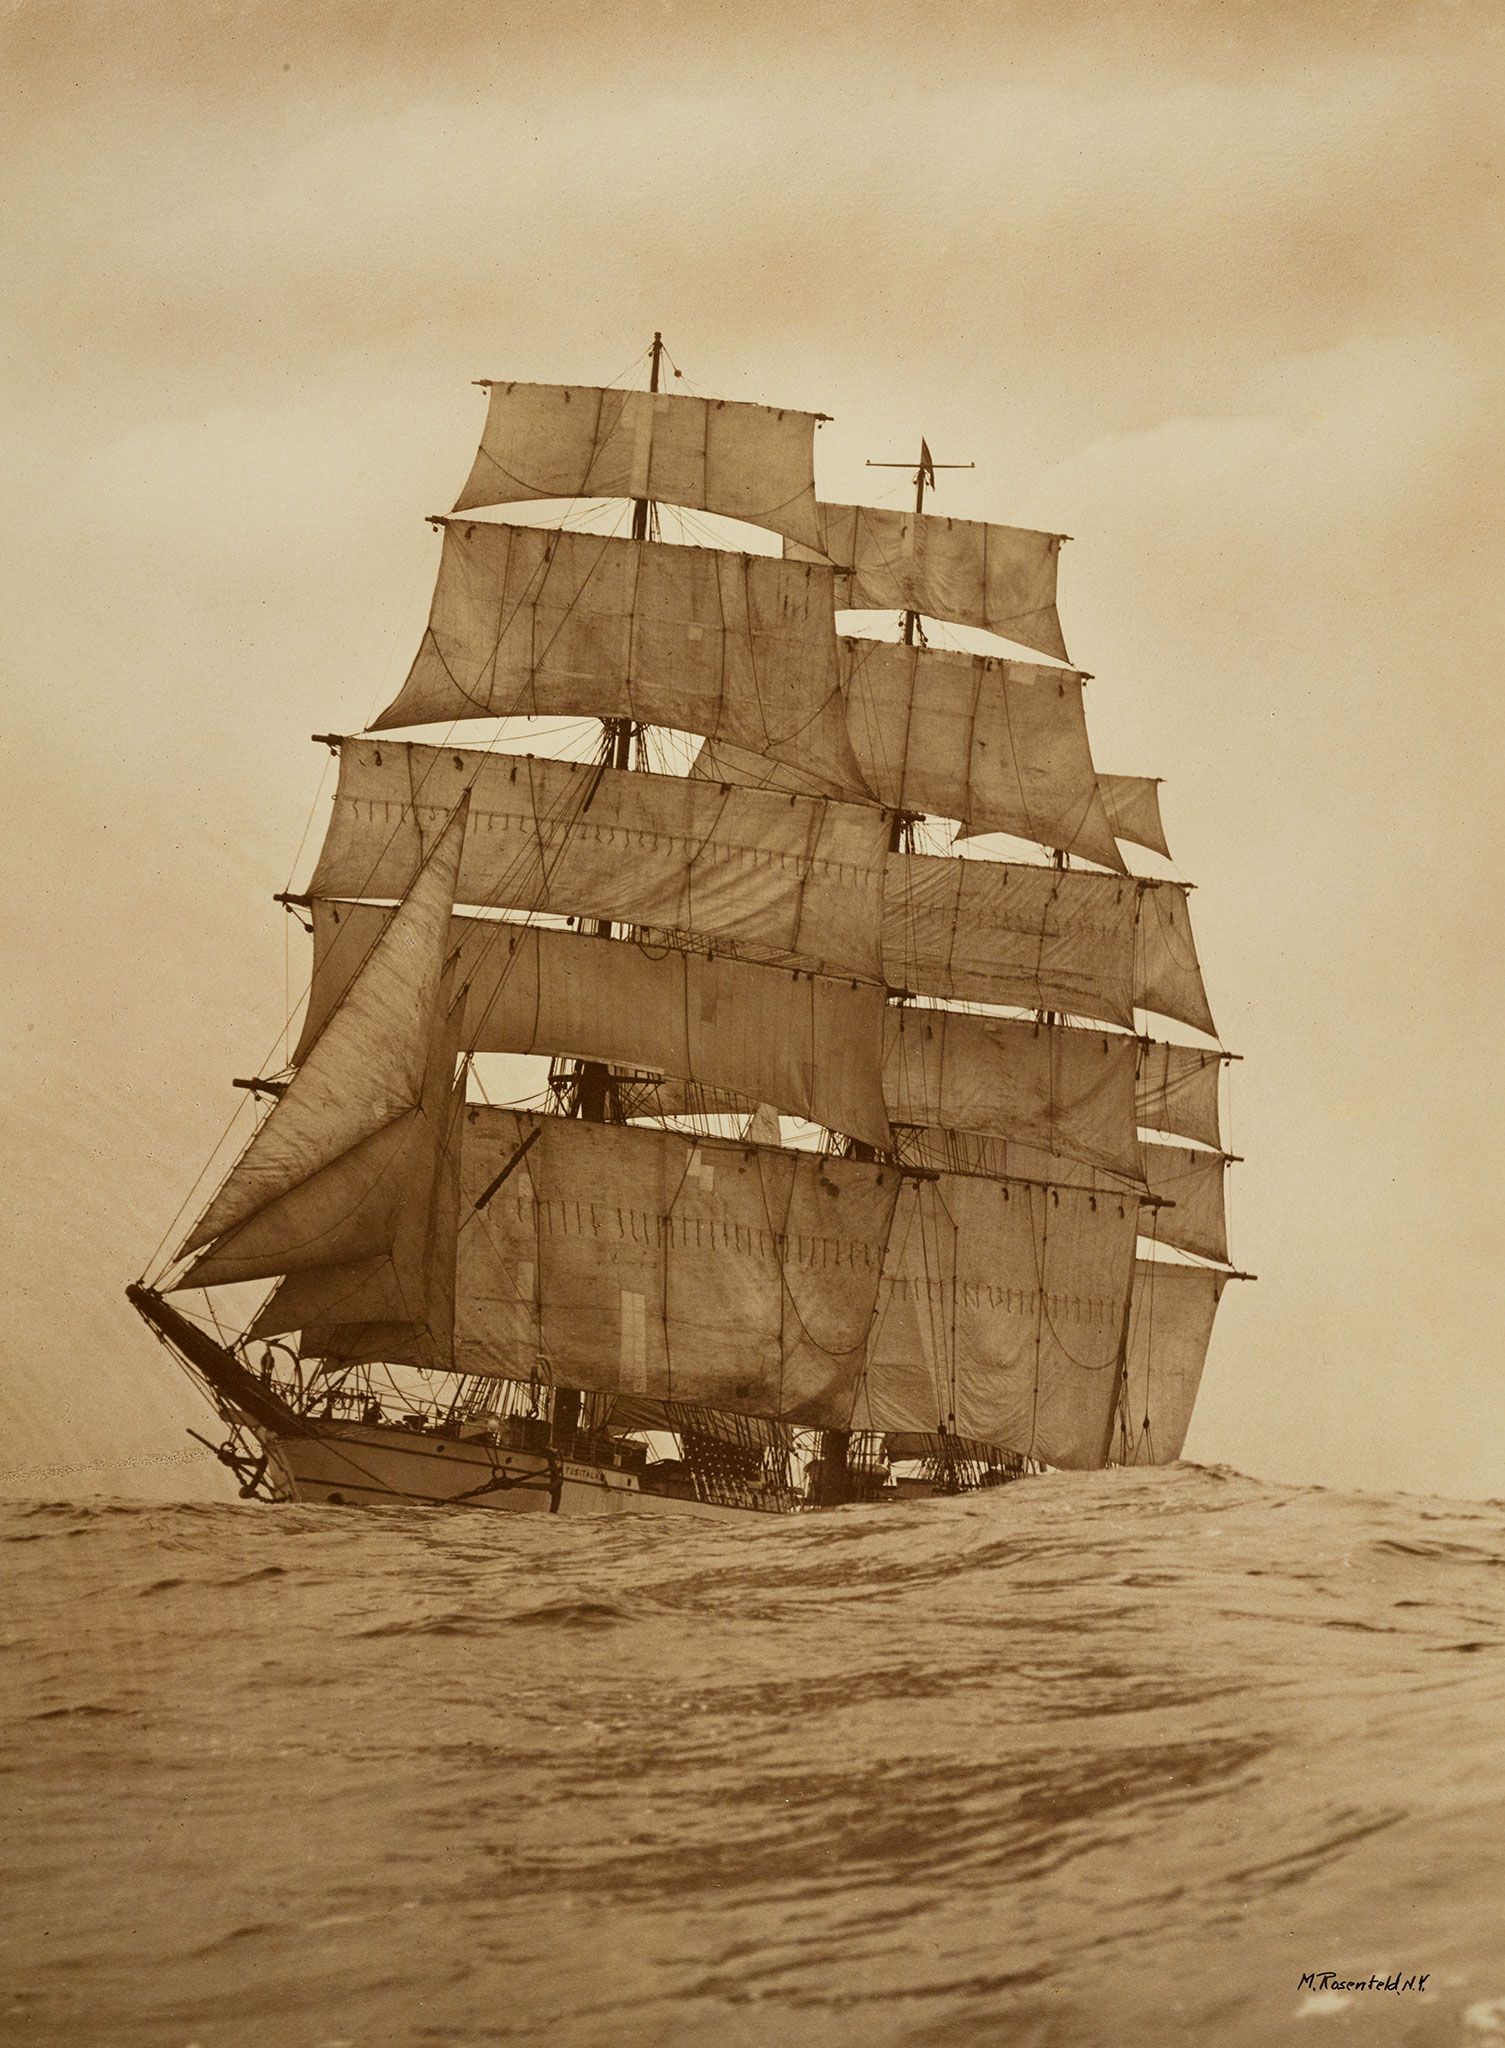 According to the definition, this photograph is of a ship due to its many masts and sails. Tusitala, Photograph, 1925.